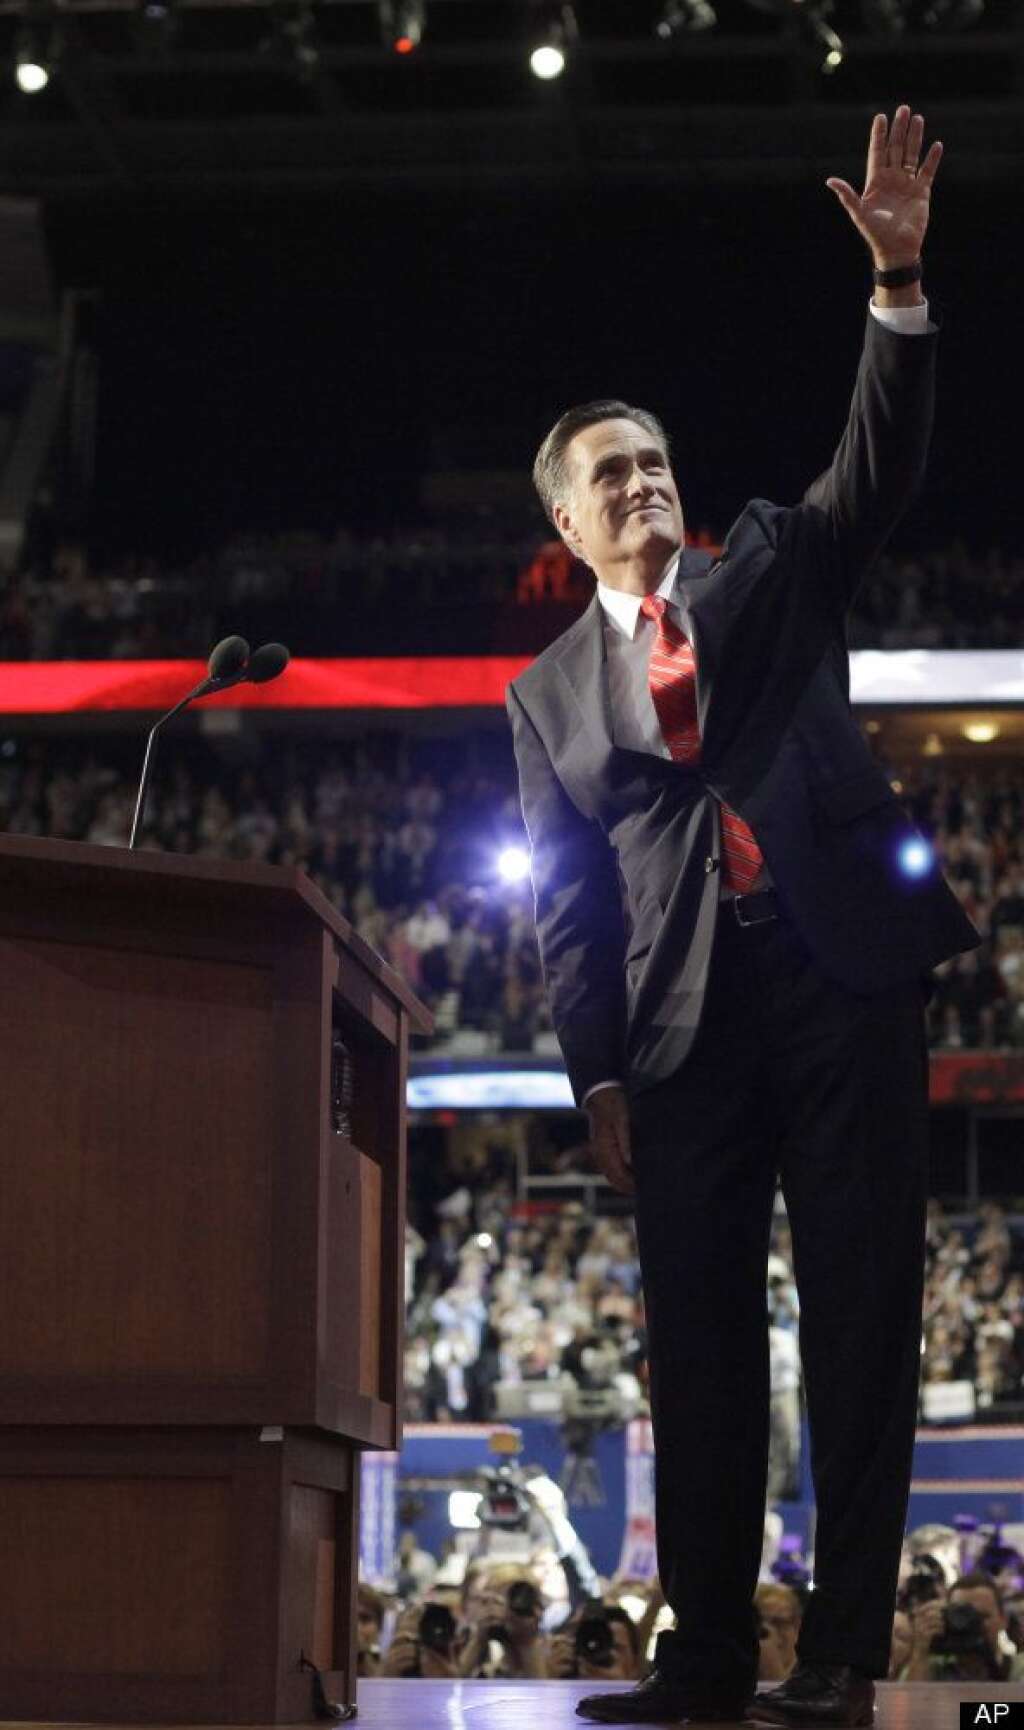 Mitt Romney - Republican presidential nominee Mitt Romney waves to delegates before speaking at the Republican National Convention in Tampa, Fla., on Thursday, Aug. 30, 2012. (AP Photo/David Goldman)